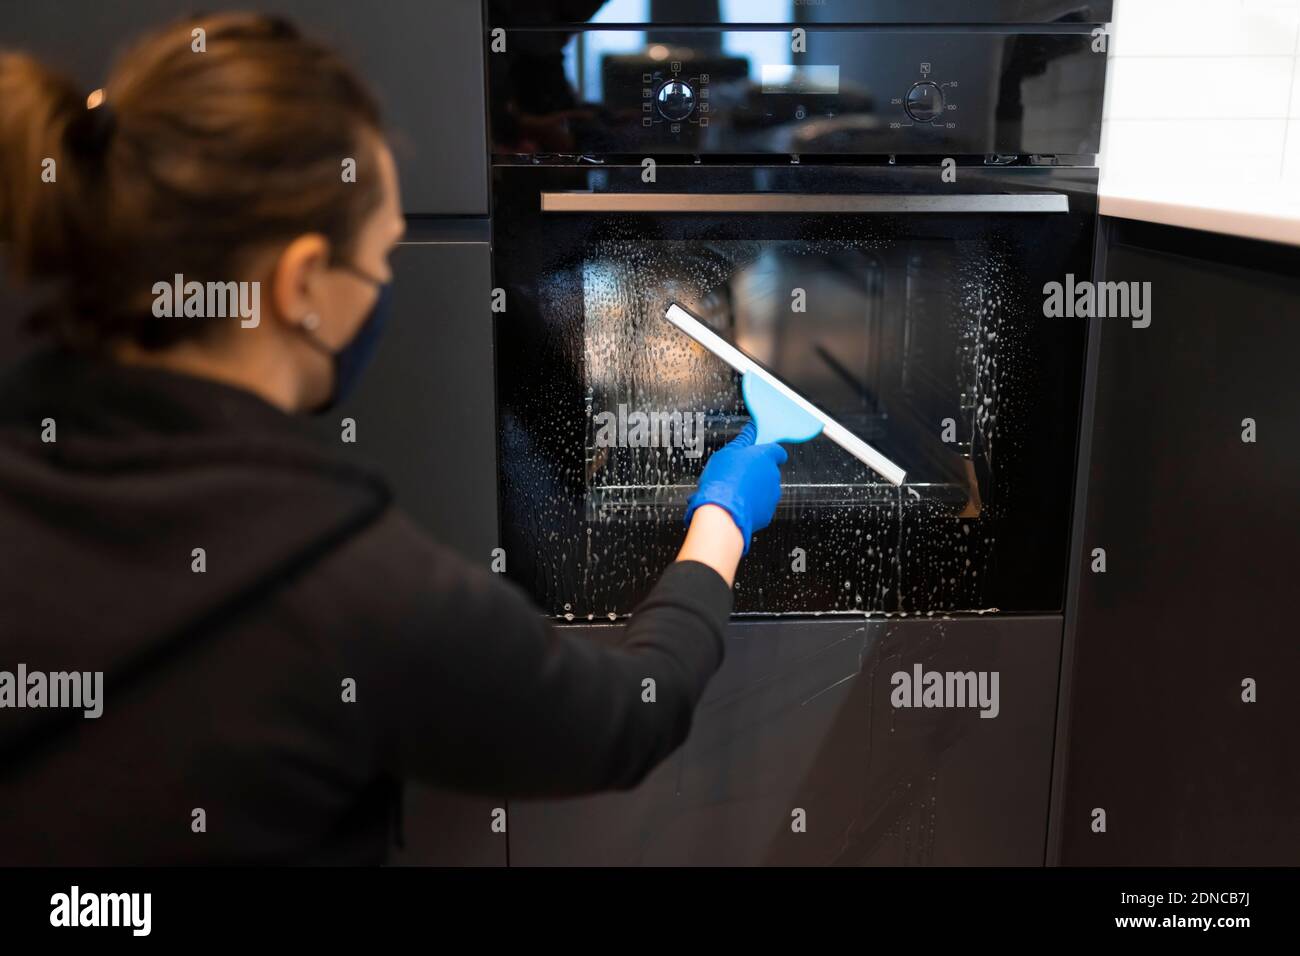 Woman washing the oven. Process of cleaning oven glass with water squeegee Stock Photo